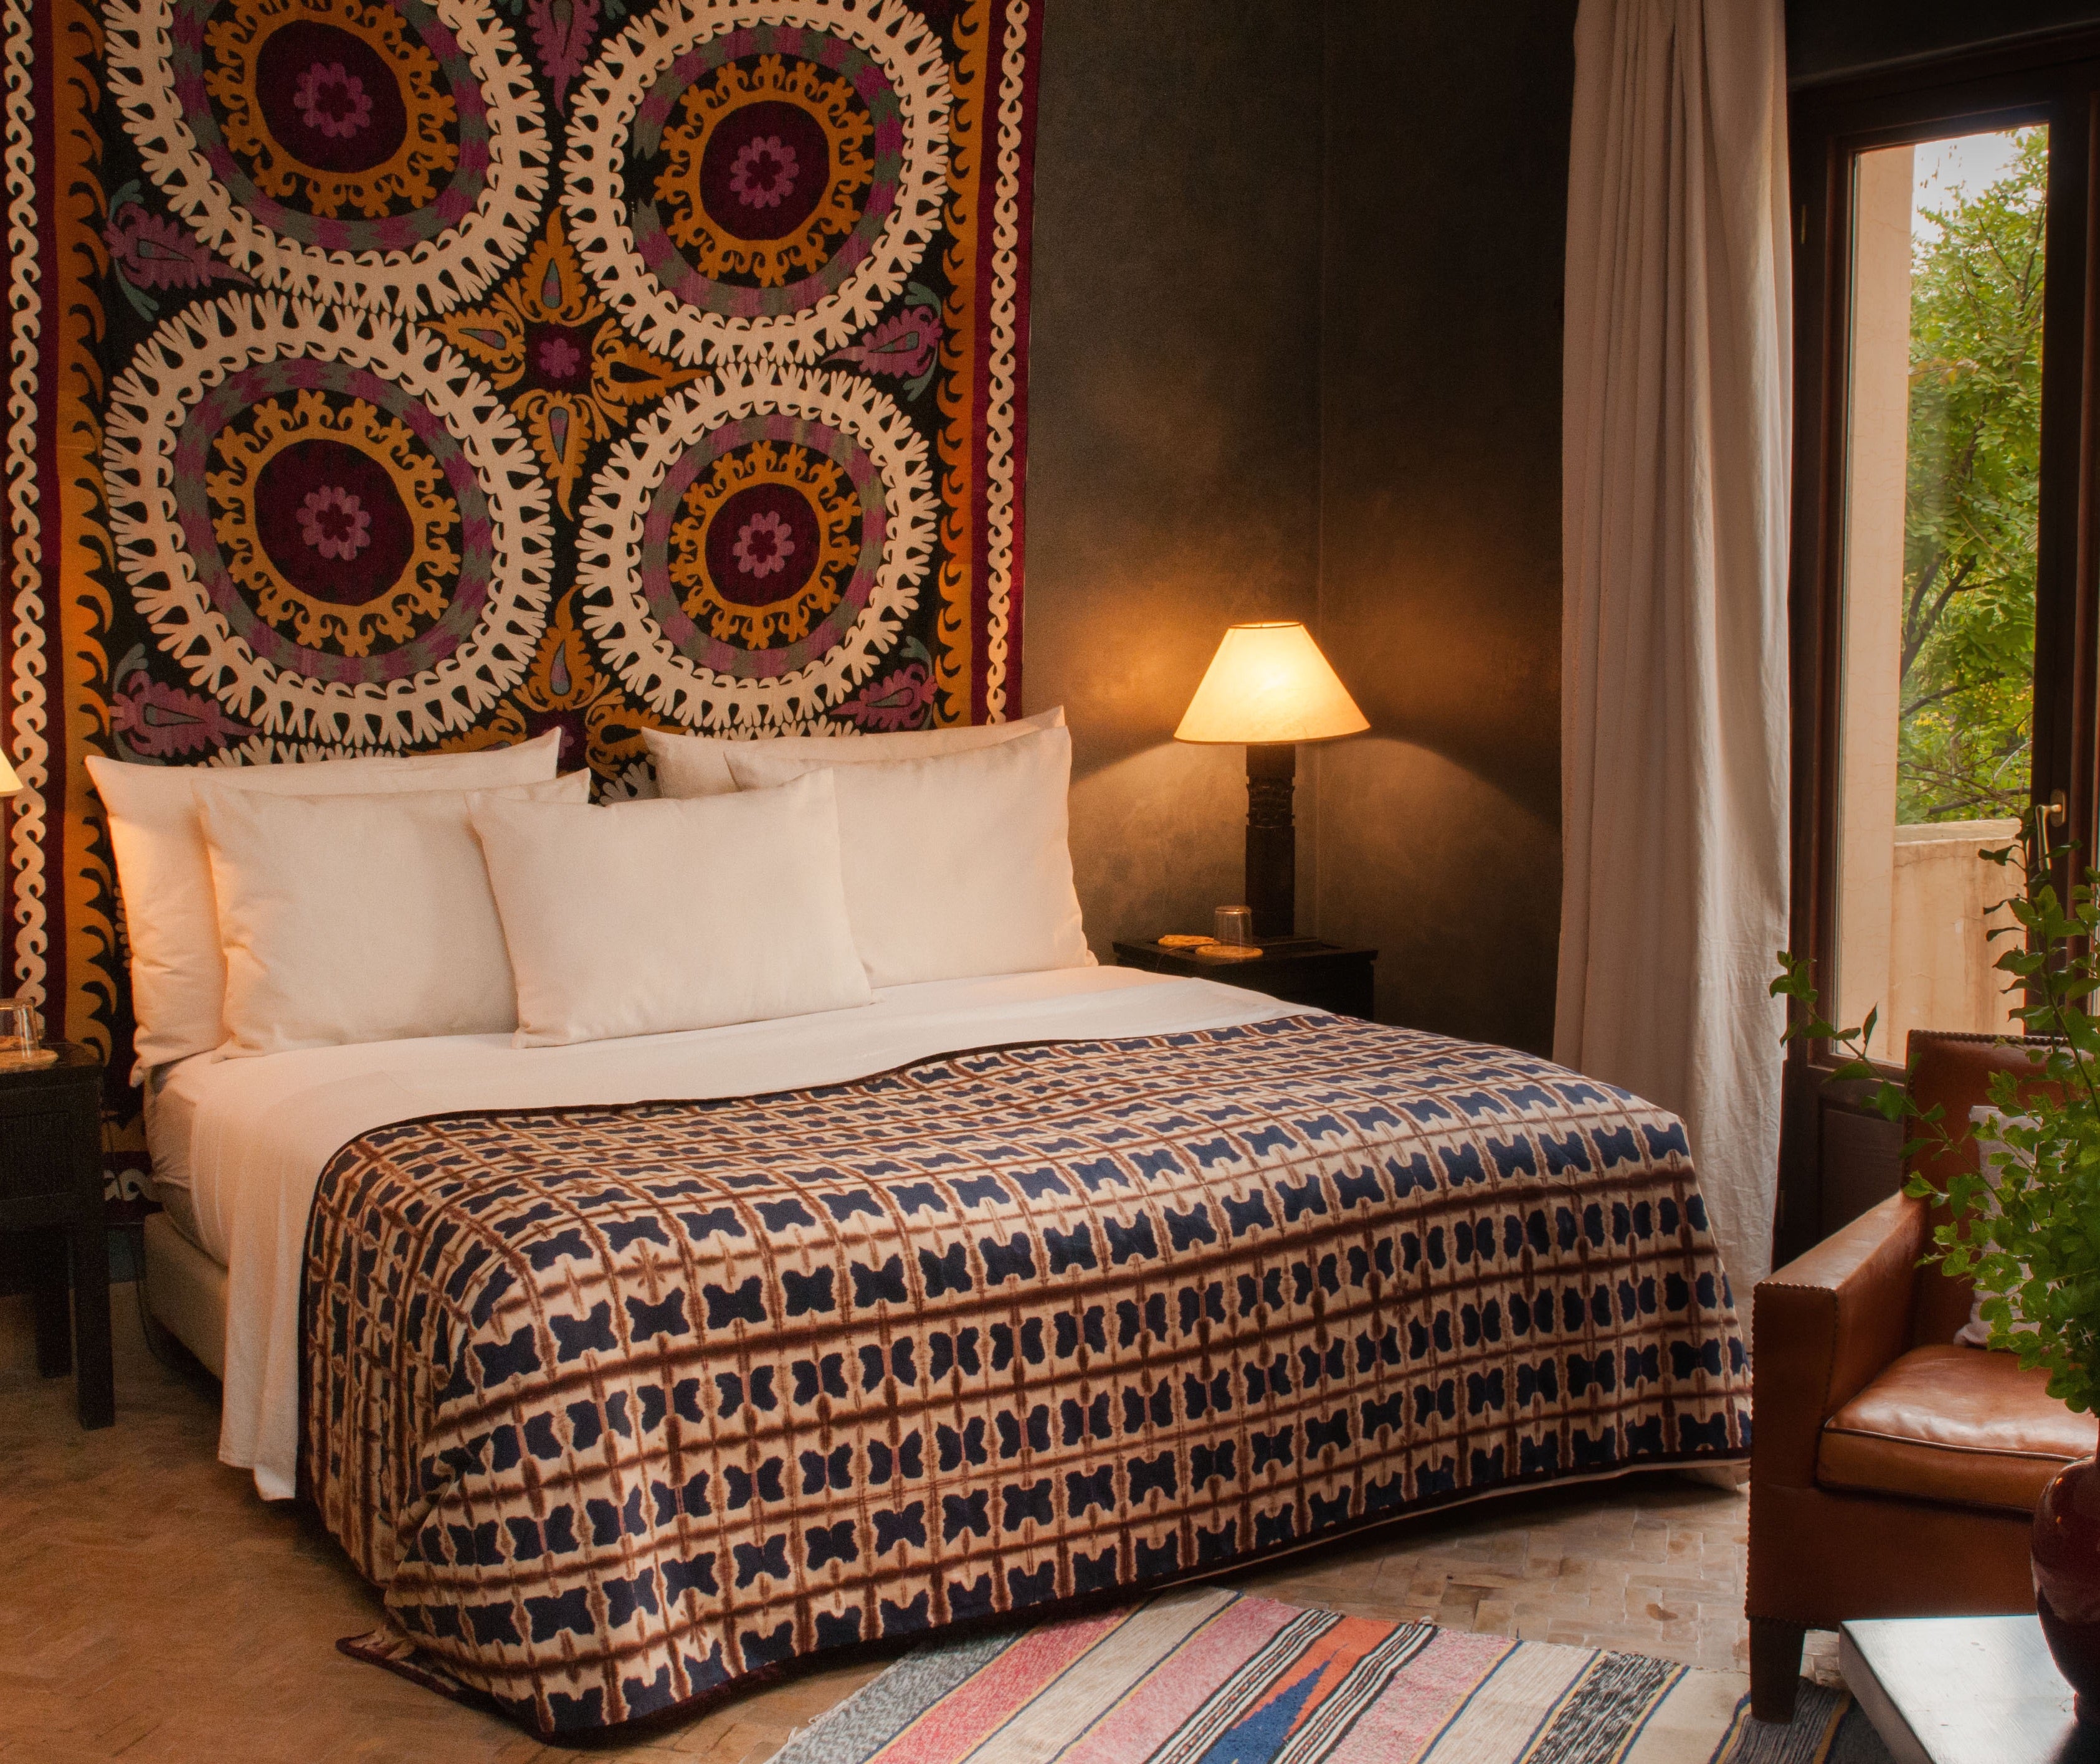 Beautiful Photos Of Jnane Tamsna, The Only Boutique Hotel In Morocco Owned and Operated By A Black Woman